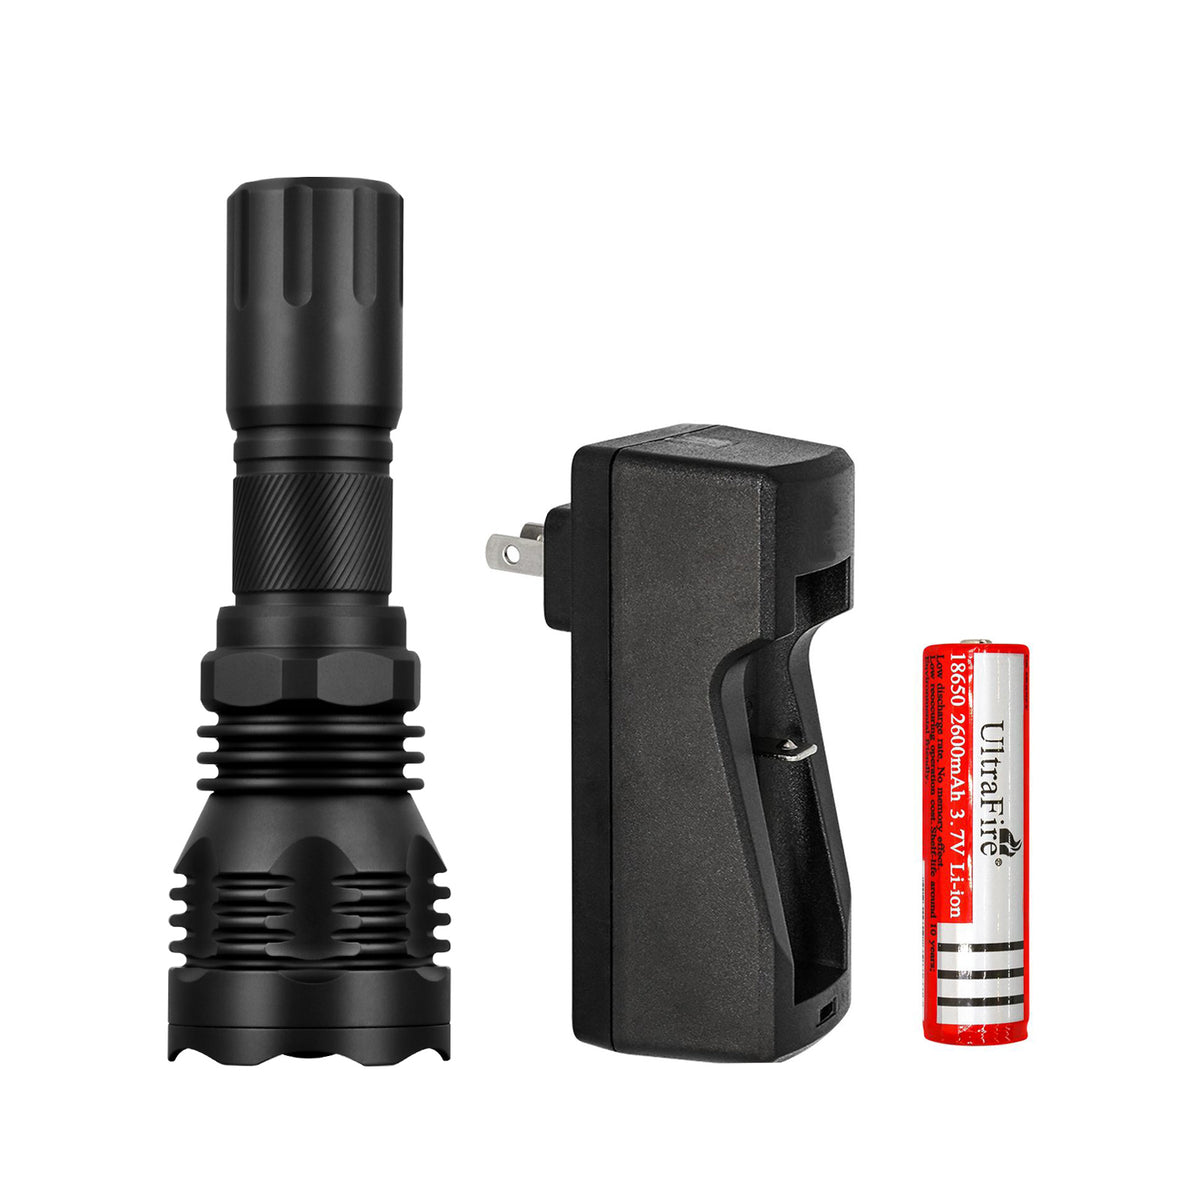 UltraFire UF-802S Infrared IR 850nm Night Vision LED Tactical Flashlight